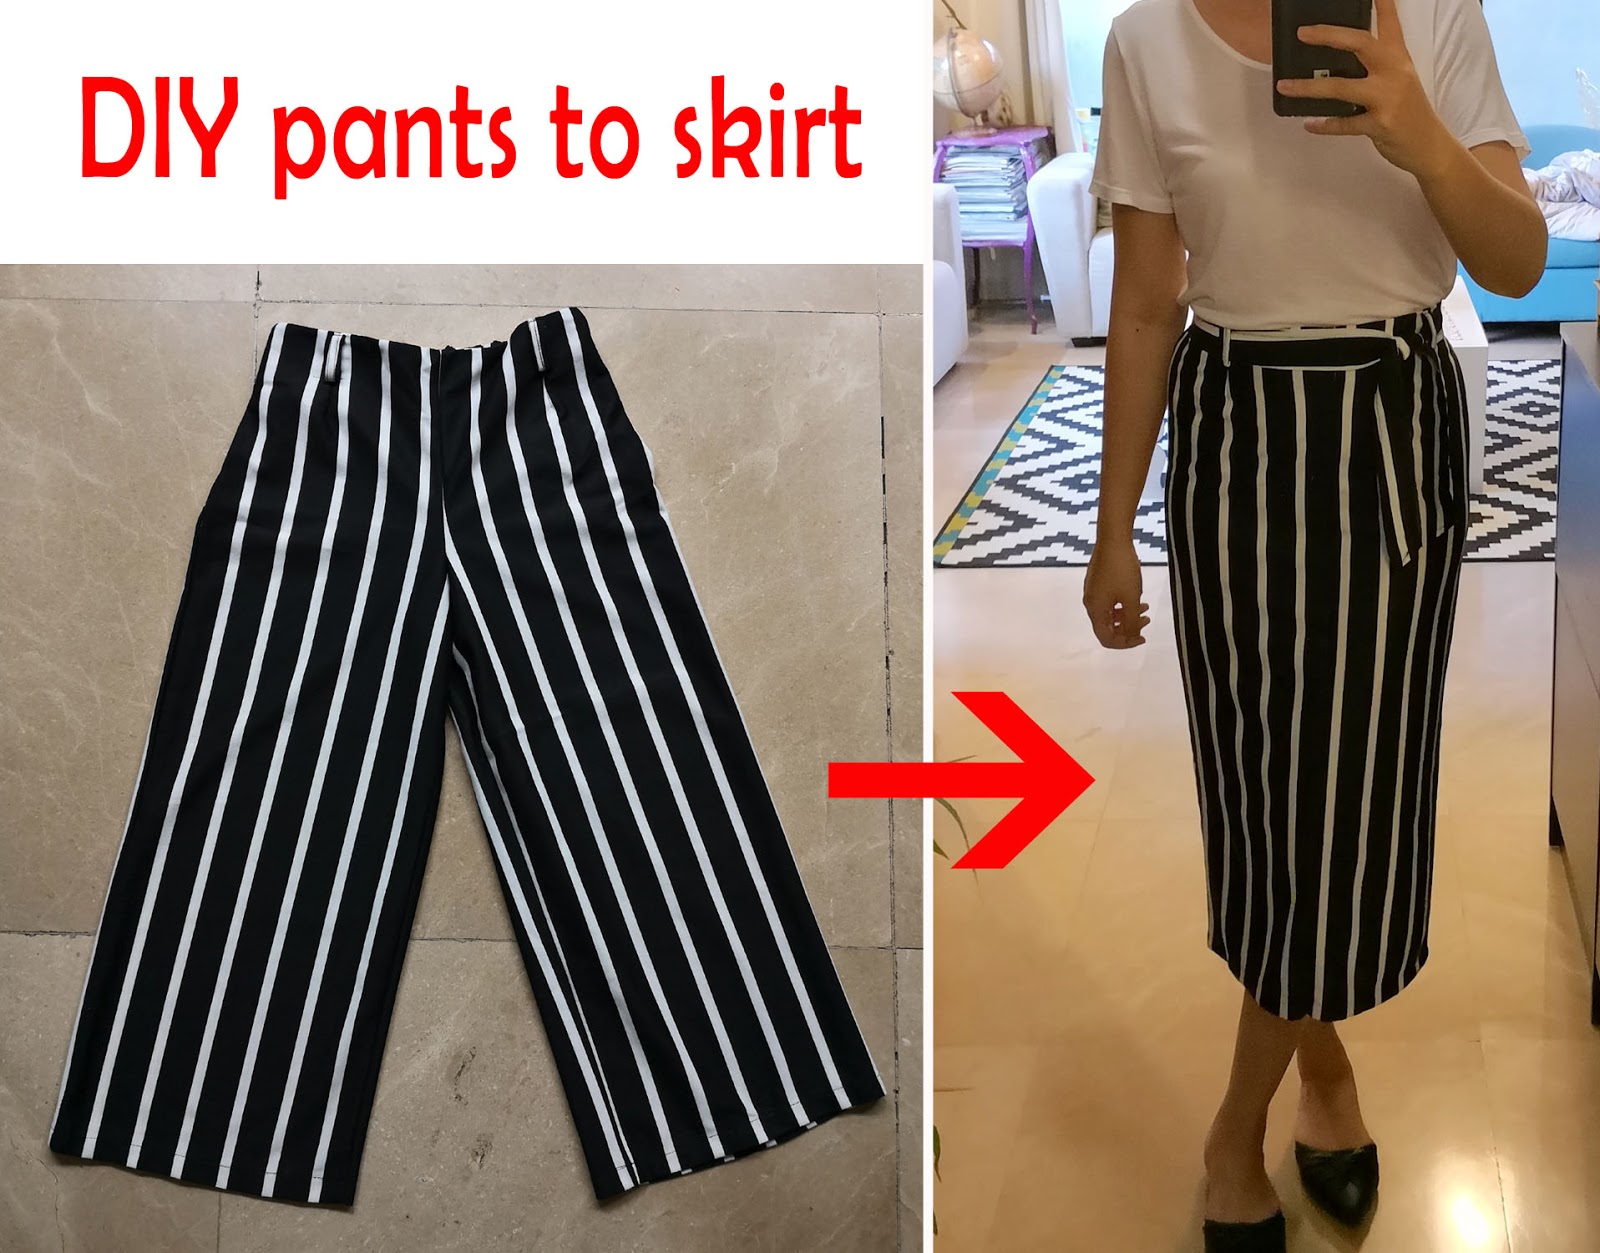 Fashionista NOW: How To Turn An Old Skirt Into Palazzo Pants? | Upcycle  clothes, Fashionista, Palazzo pants